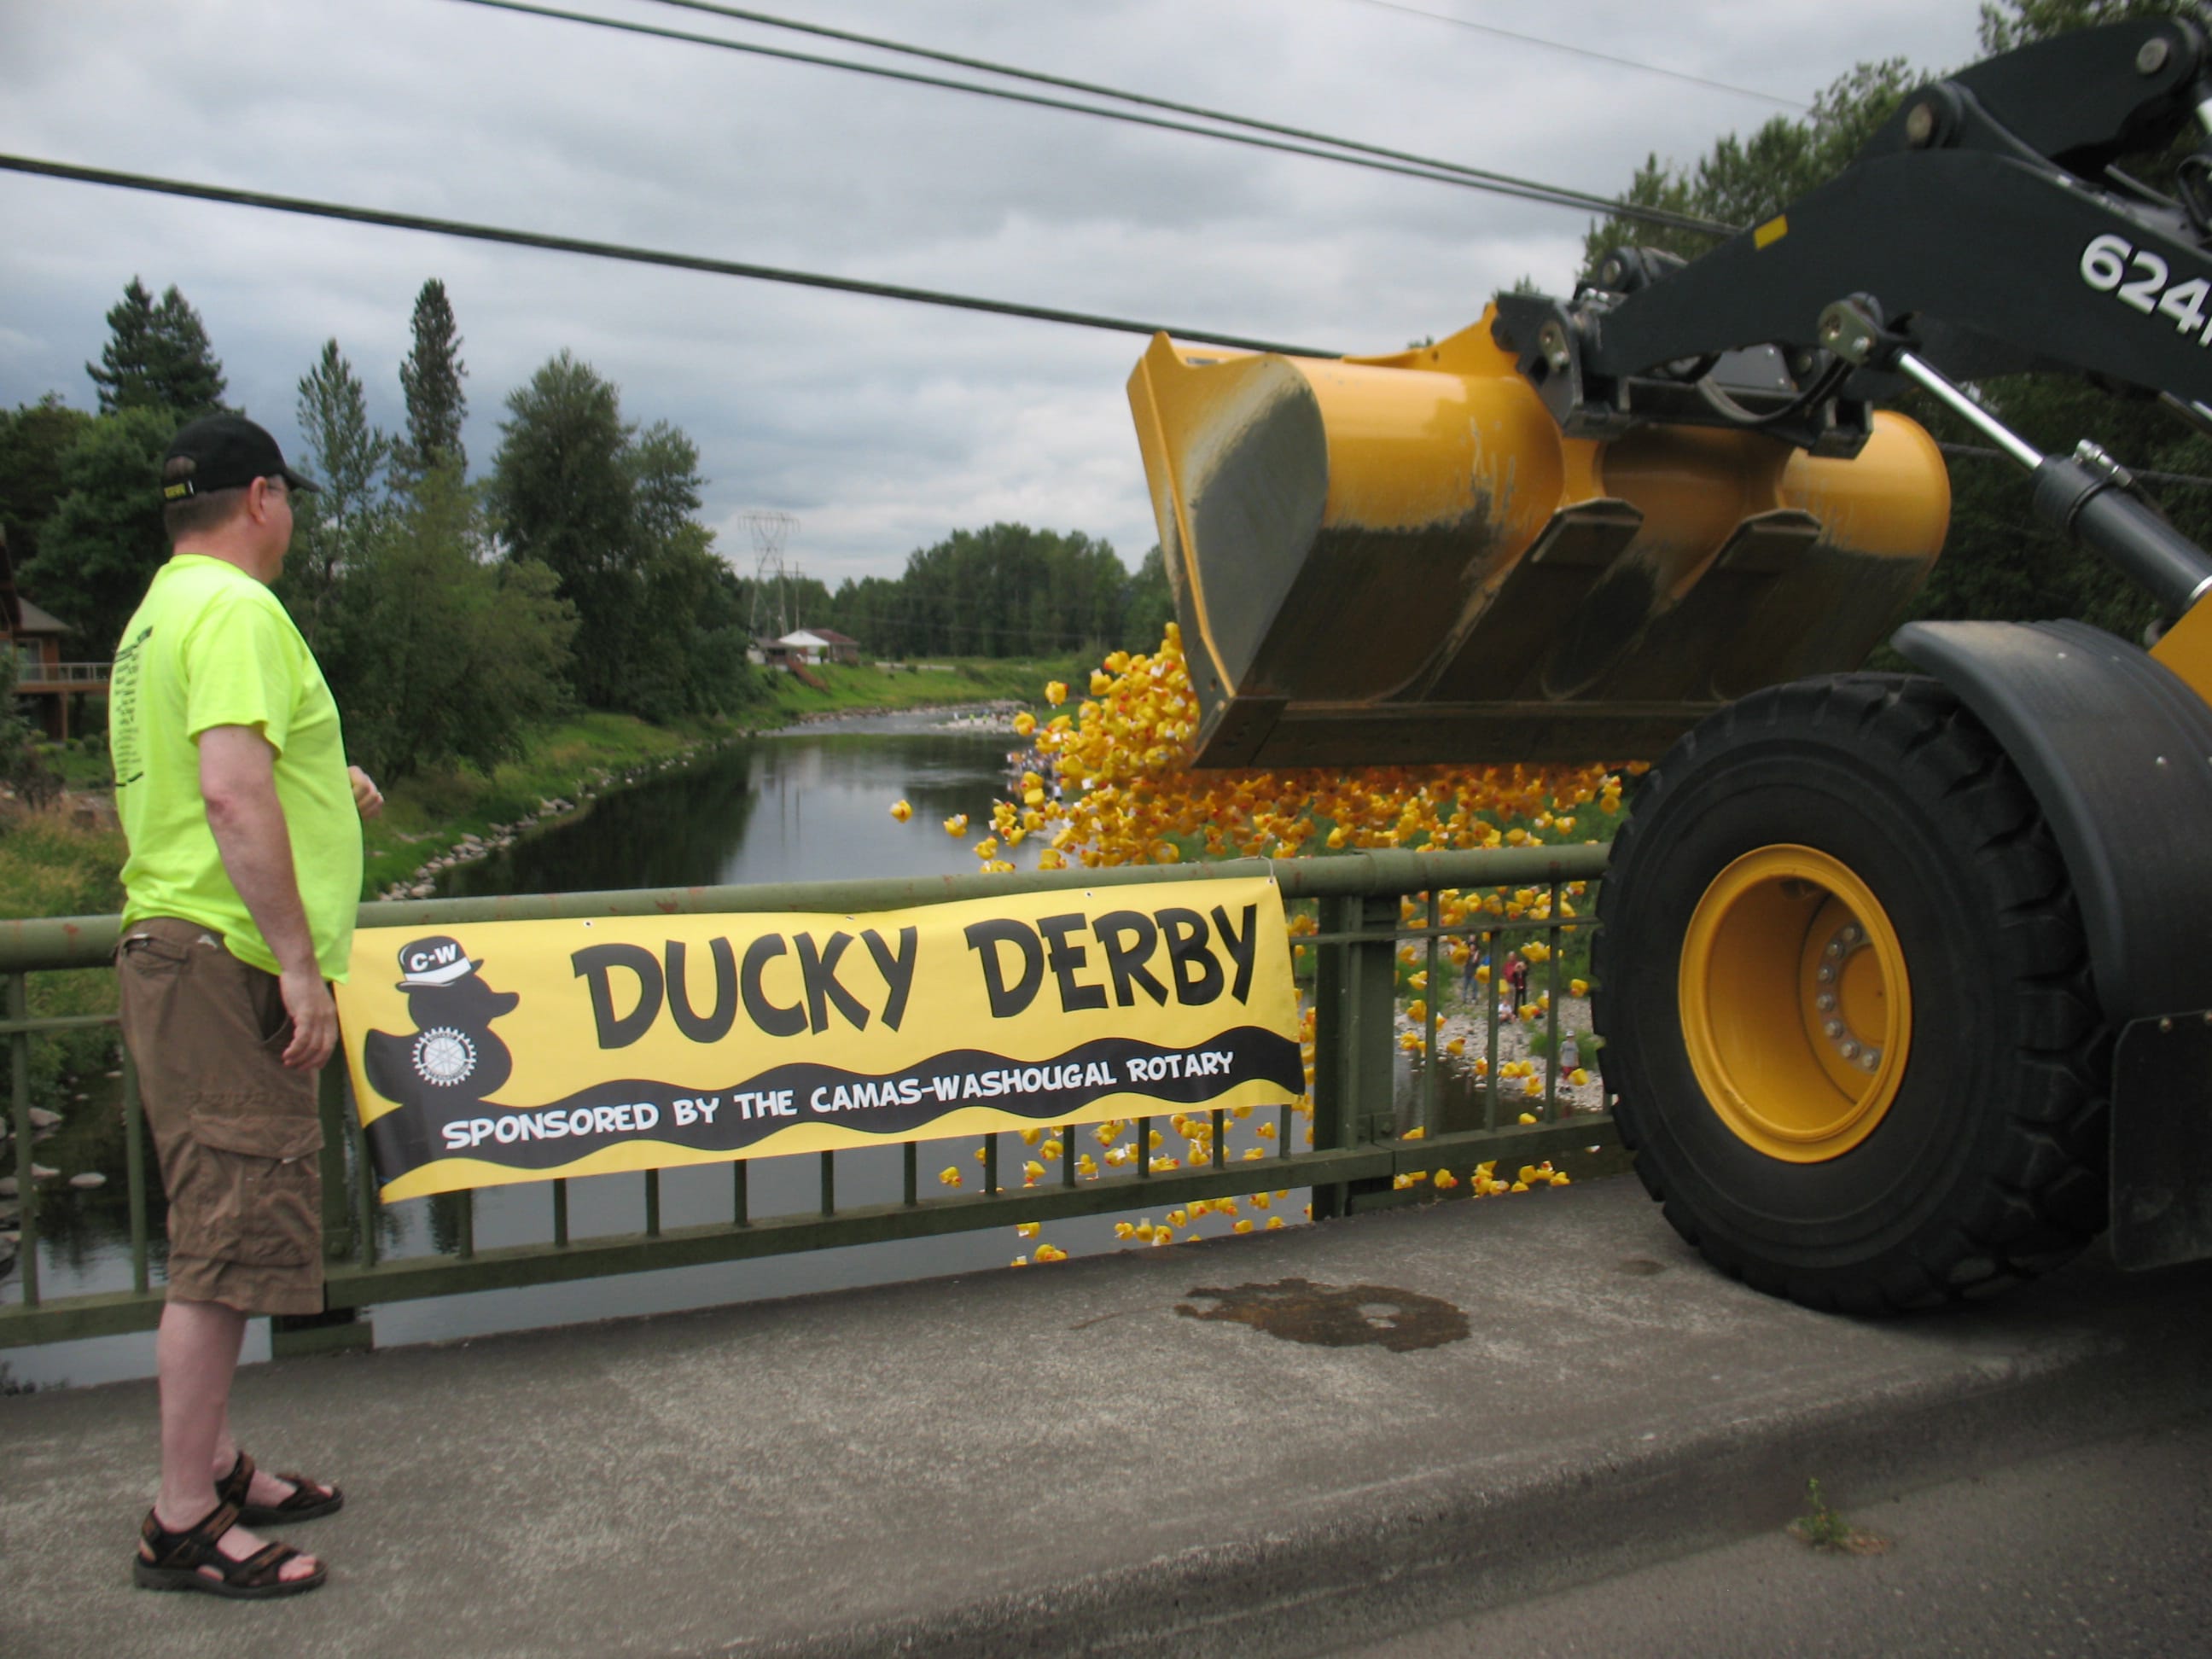 The Camas-Washougal Rotary Club participates in the &quot;Ducky Derby,&quot; an annual fundraiser for the club's various service projects and scholarships. Plastic ducks are tossed off the Third Avenue Bridge in Camas.